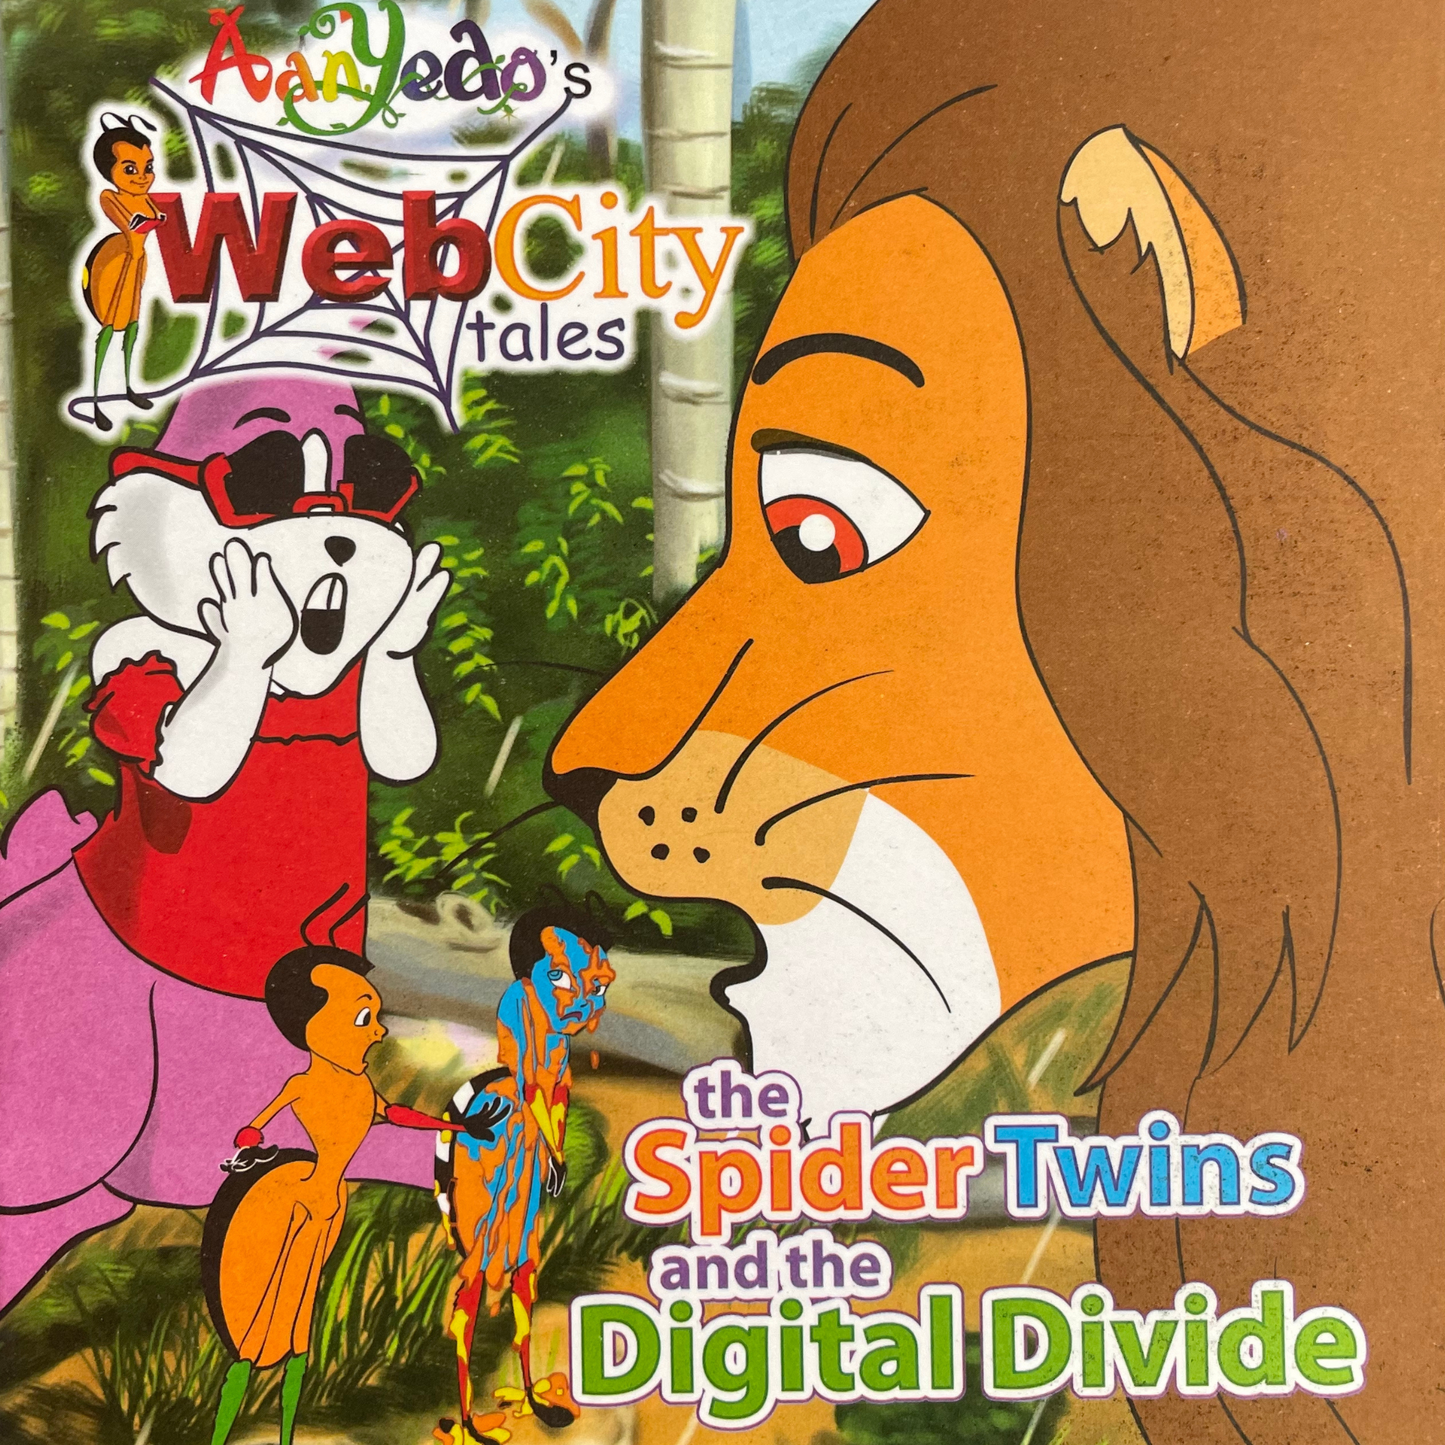 The Spider Twins and the Digital Divide